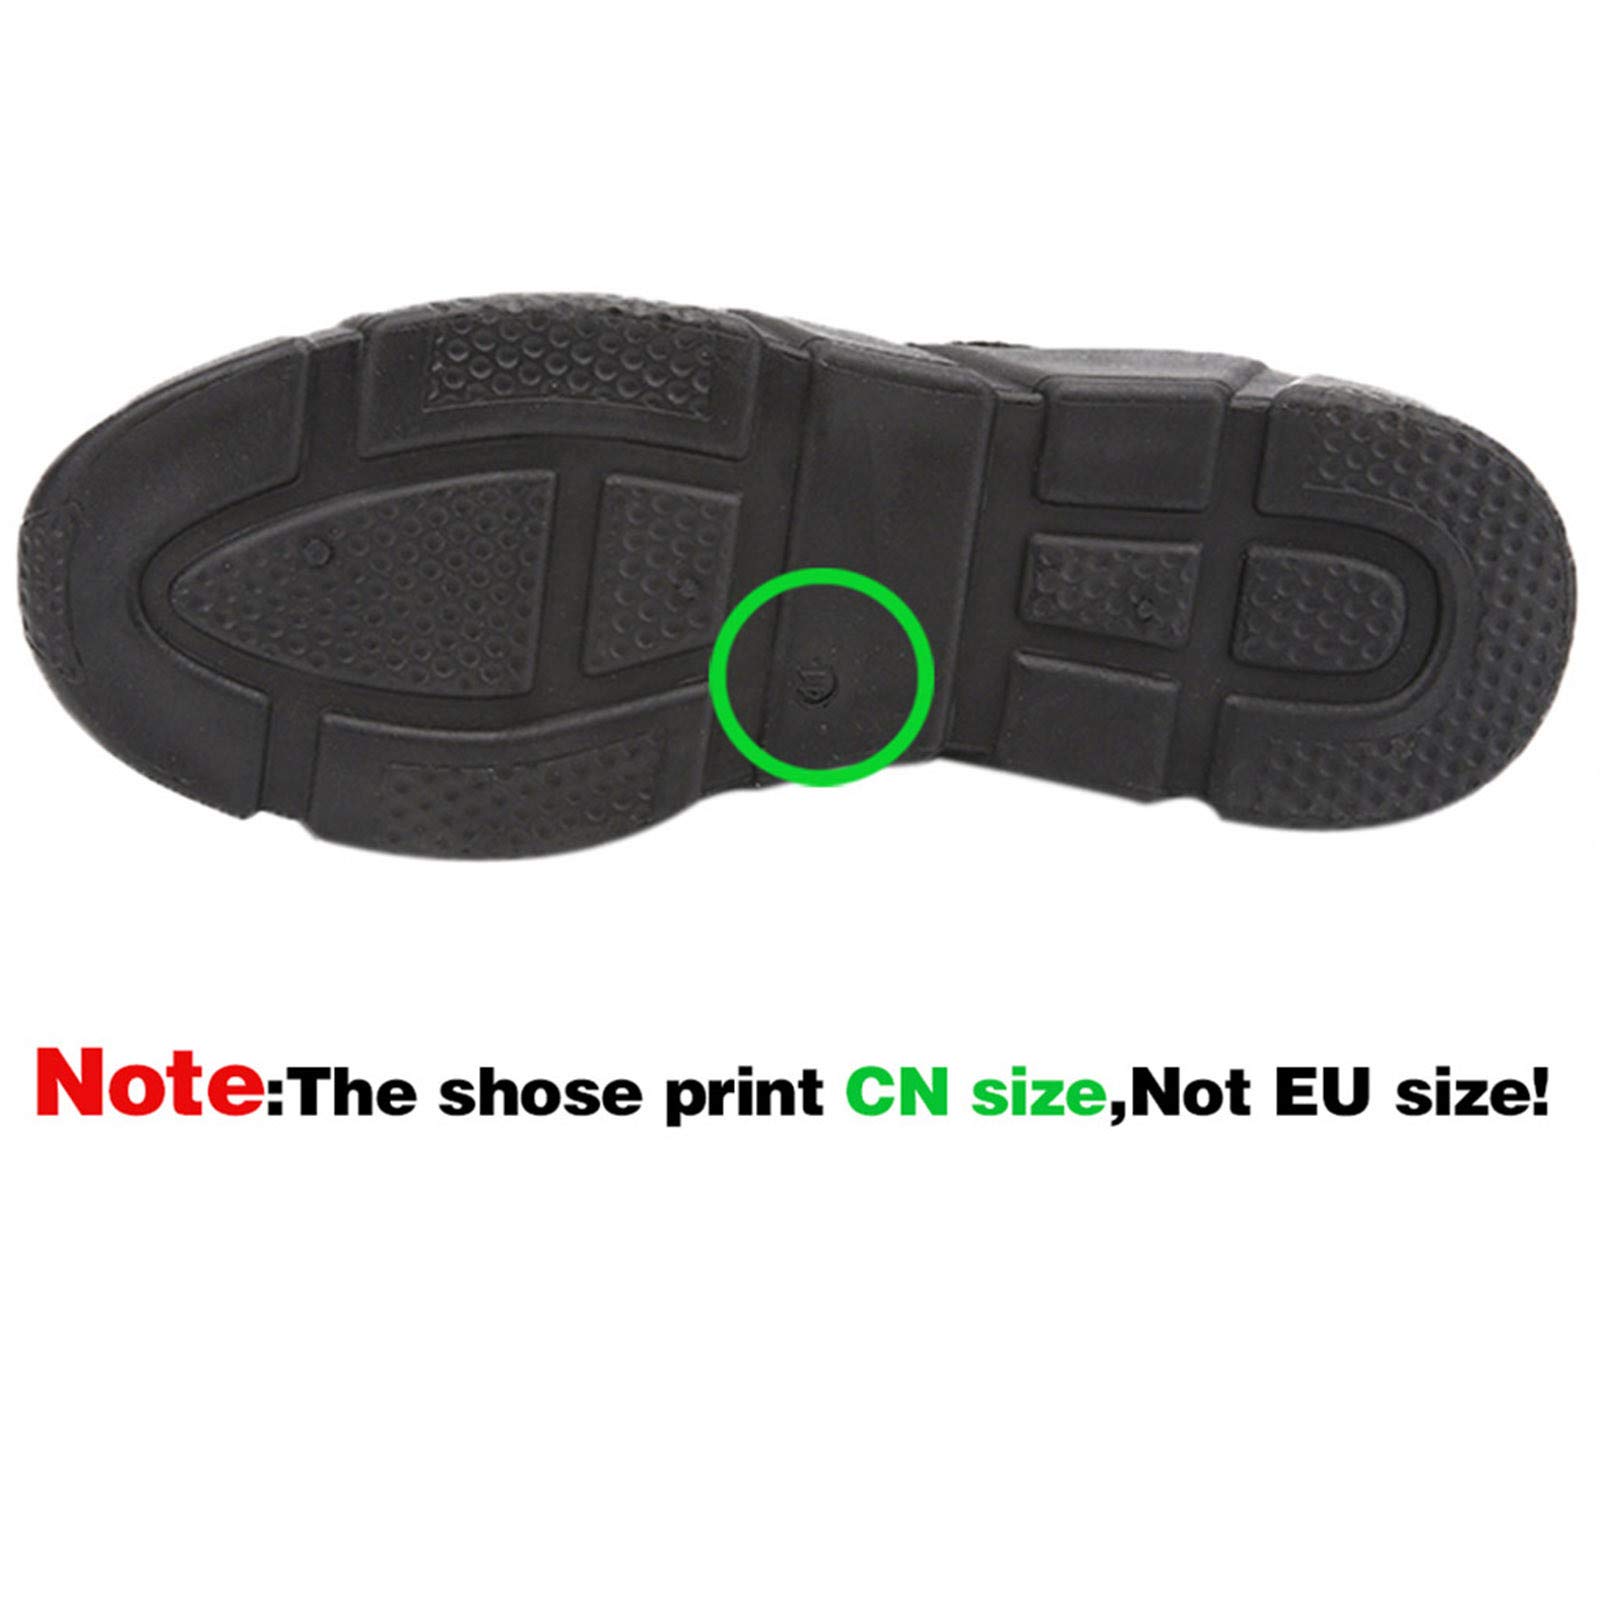 USYFAKGH Mens Sandals with Arch Support Orthotic Flip Flops for Plantar Fasciitis Flat Feet Indoor Outdoor Beach Slippers